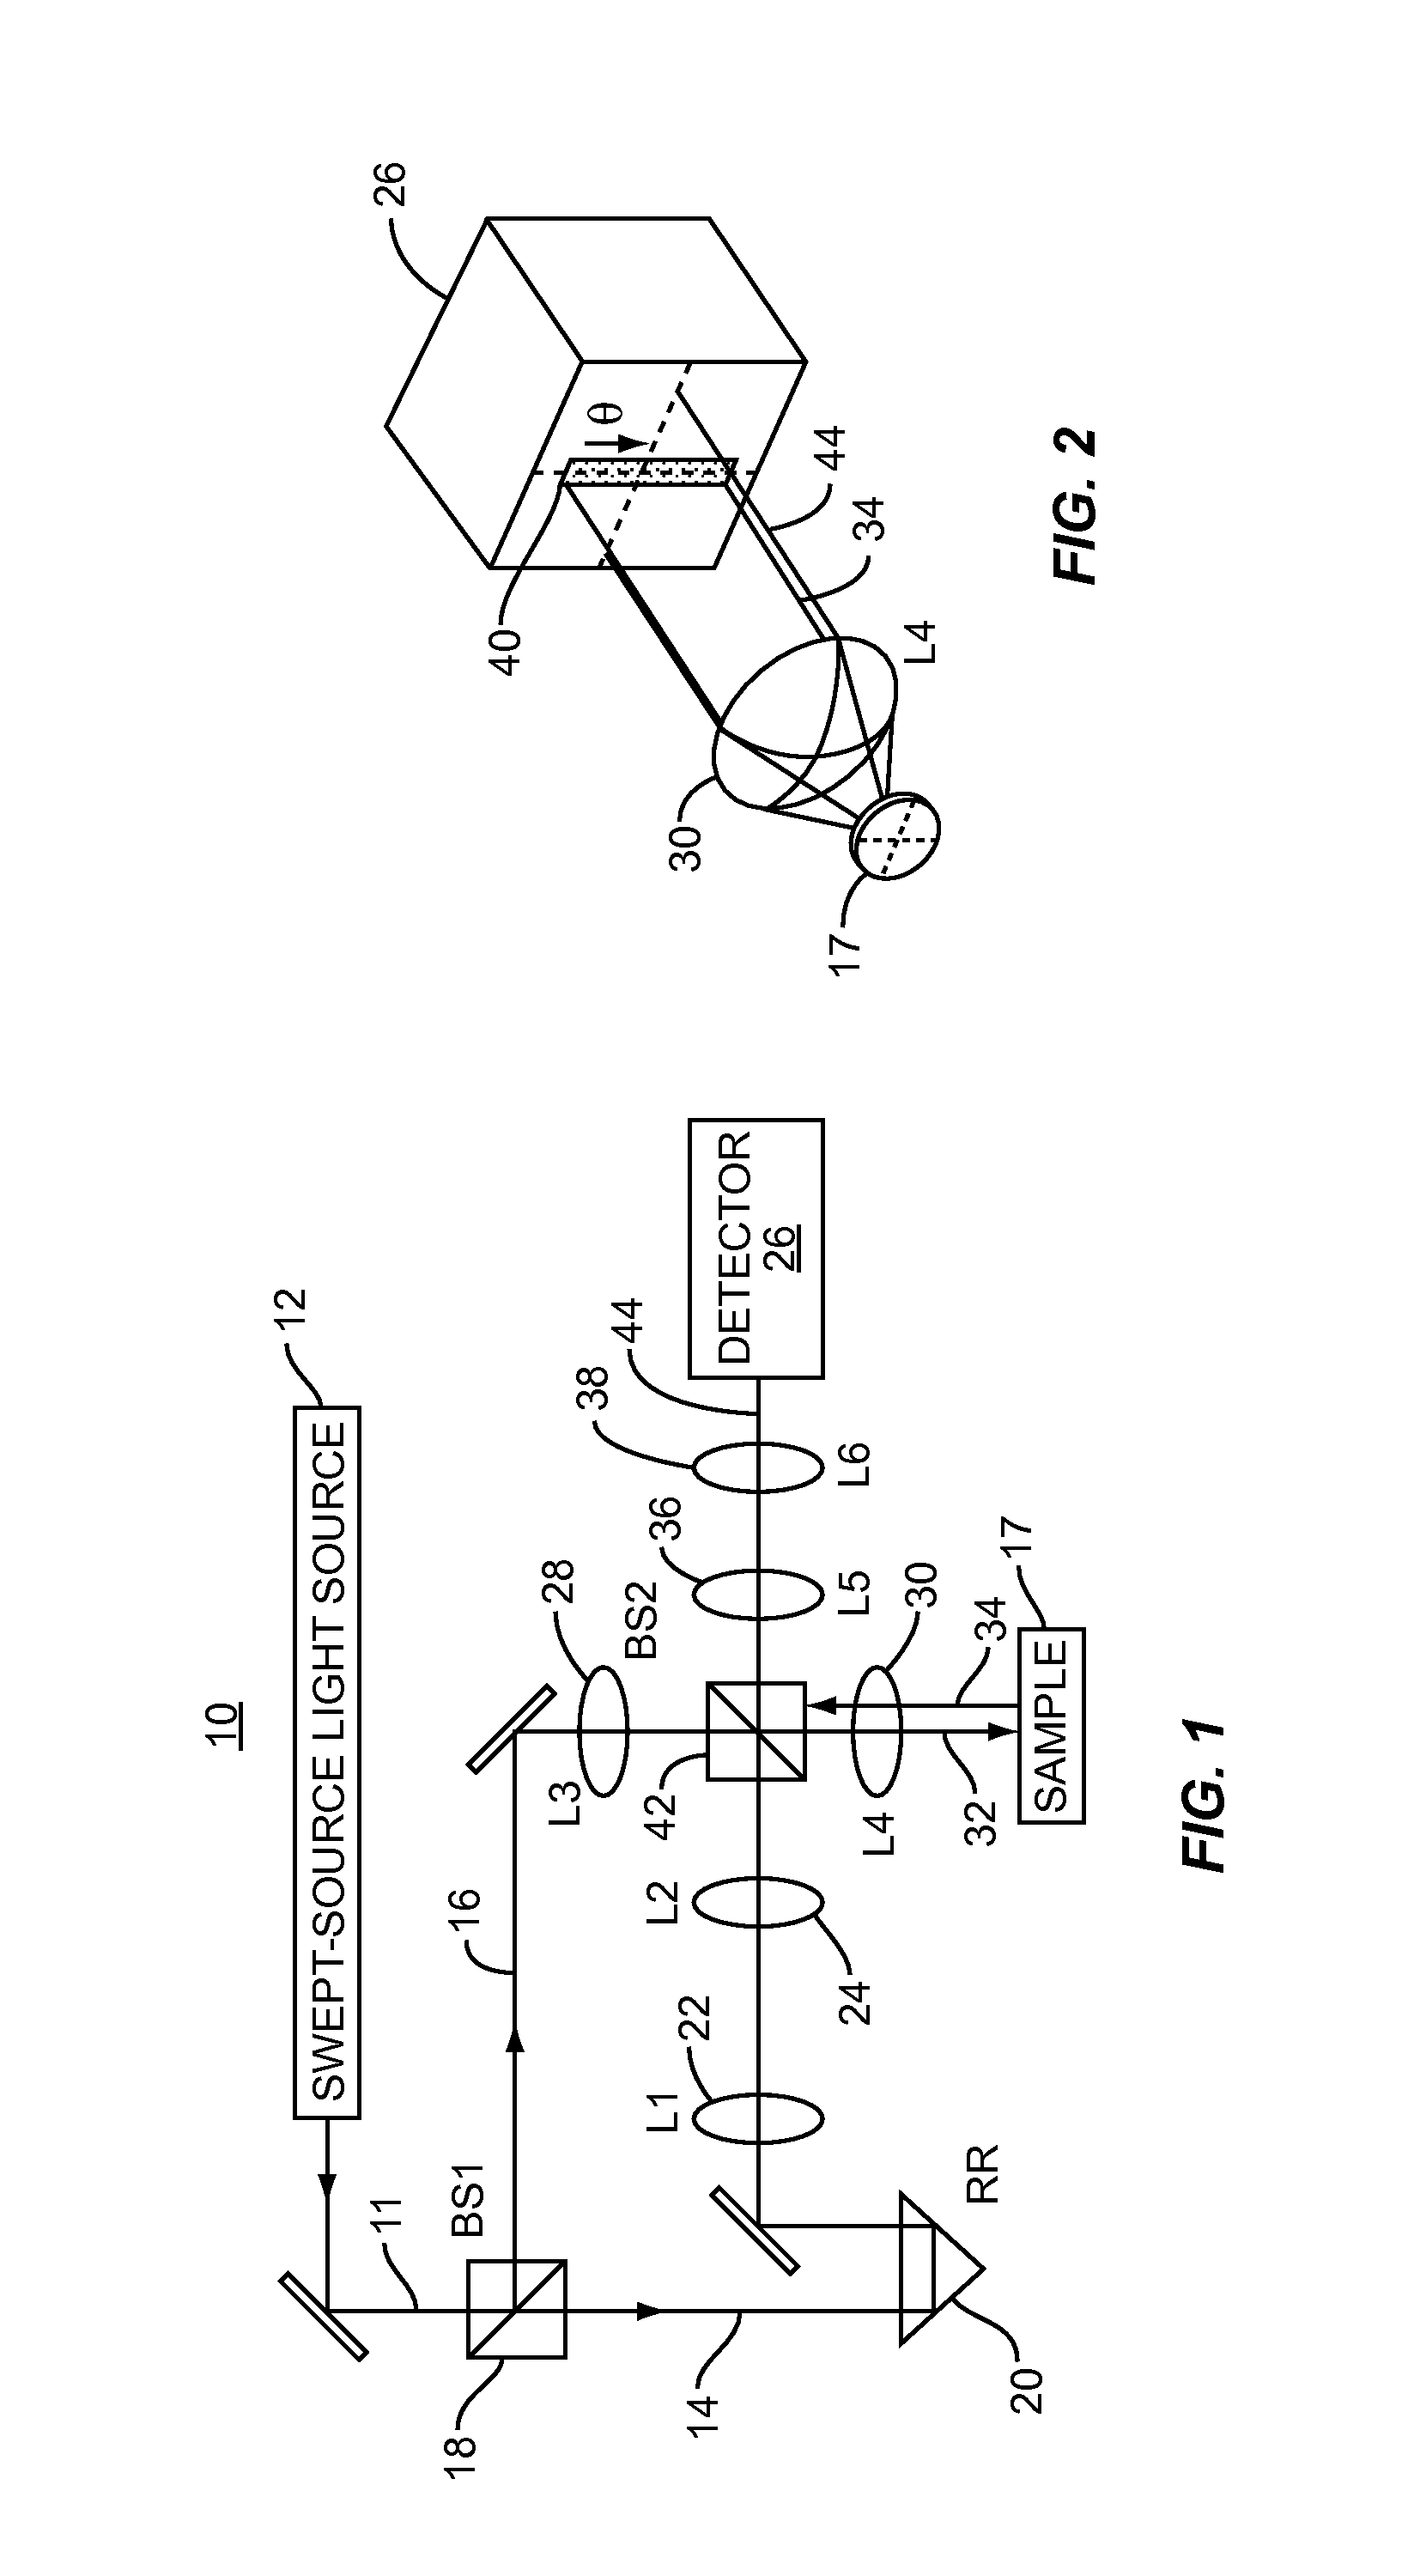 Apparatuses, systems, and methods for low-coherence interferometry (LCI)